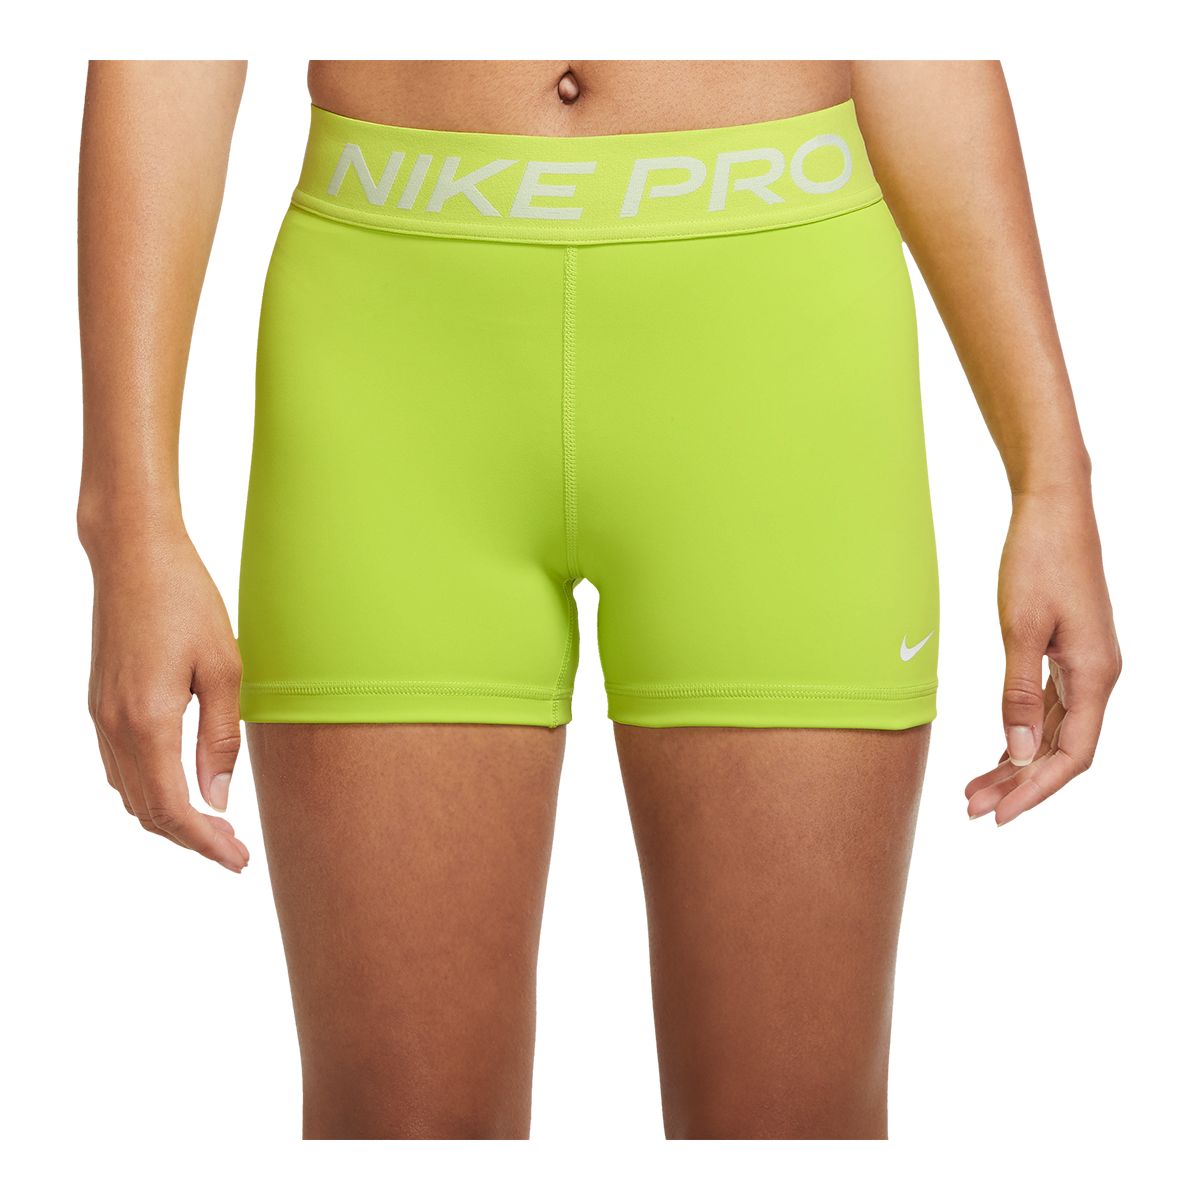 Nike pro 3'' shorts women • Compare best prices now »